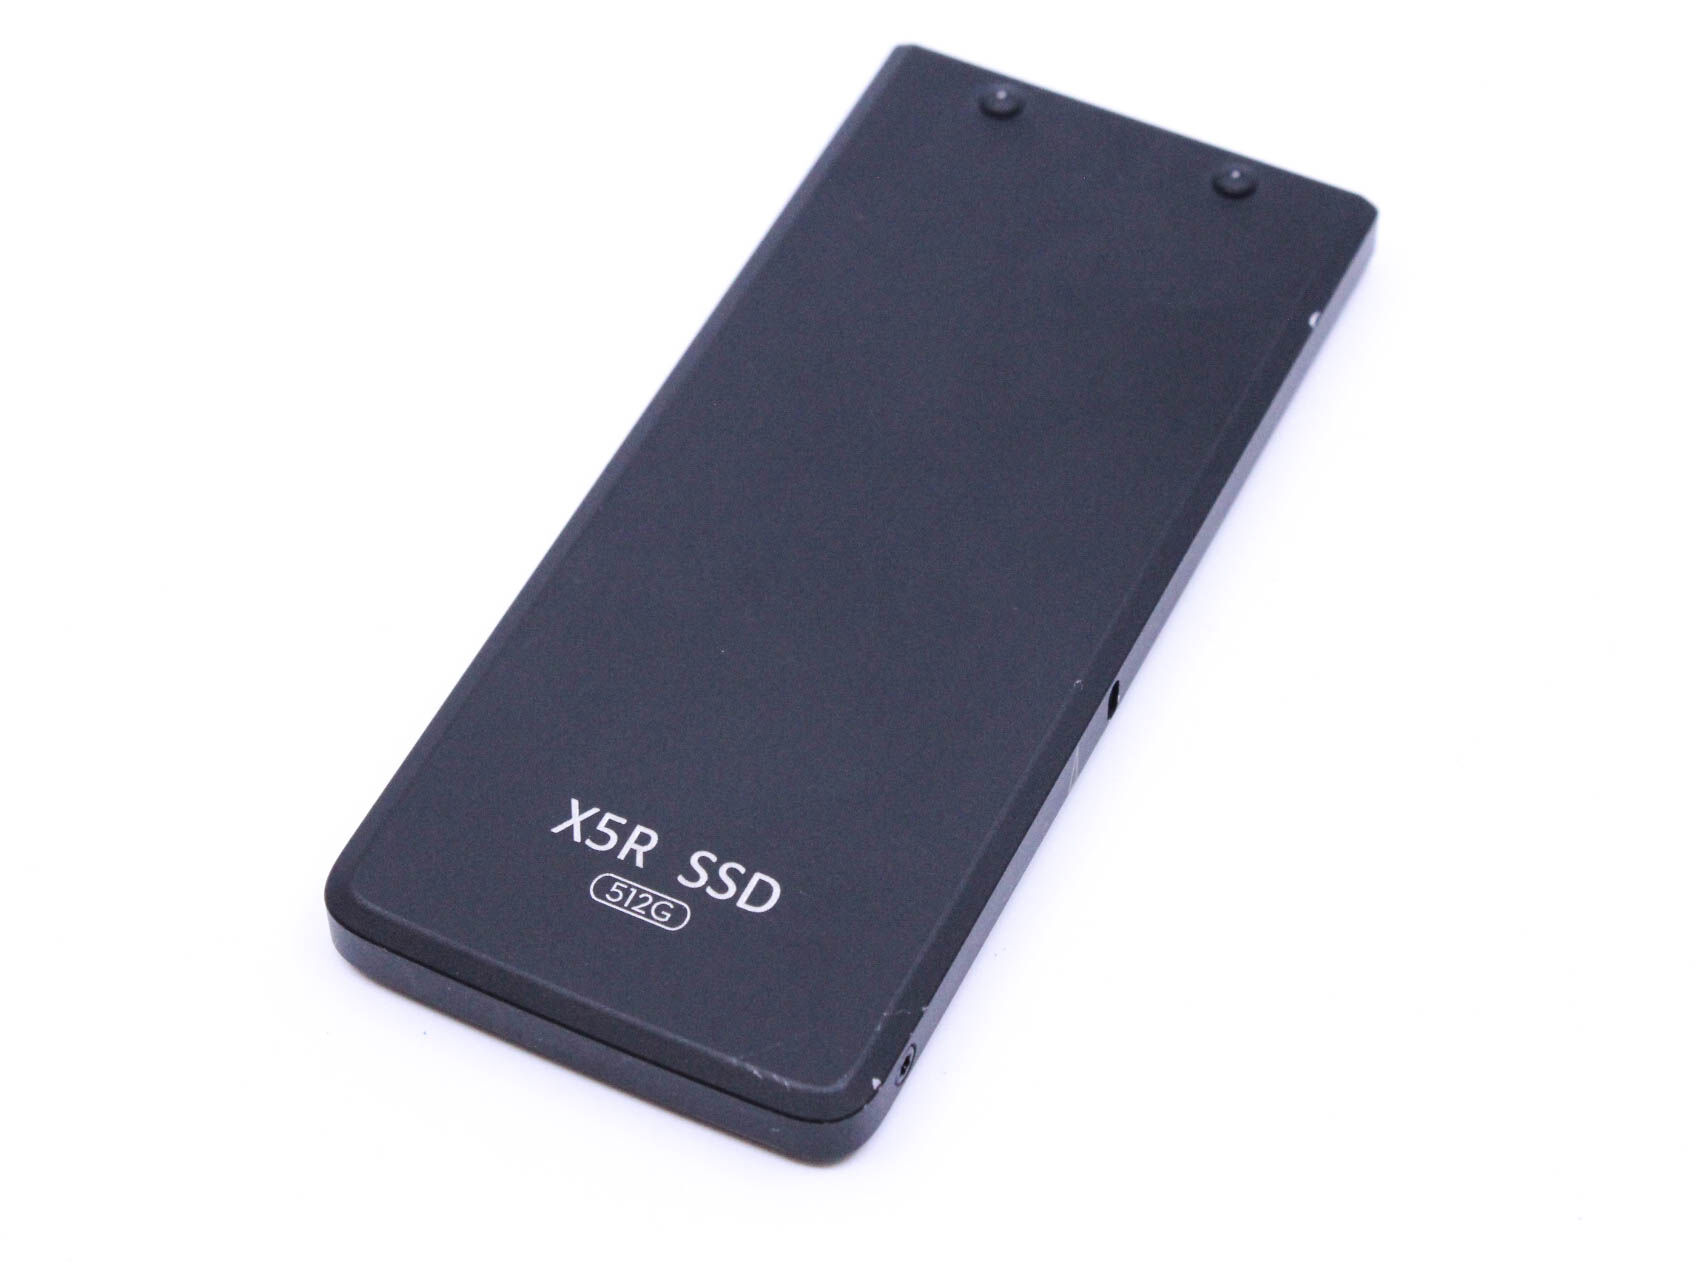 Used DJI 512GB SSD for Zenmuse X5R